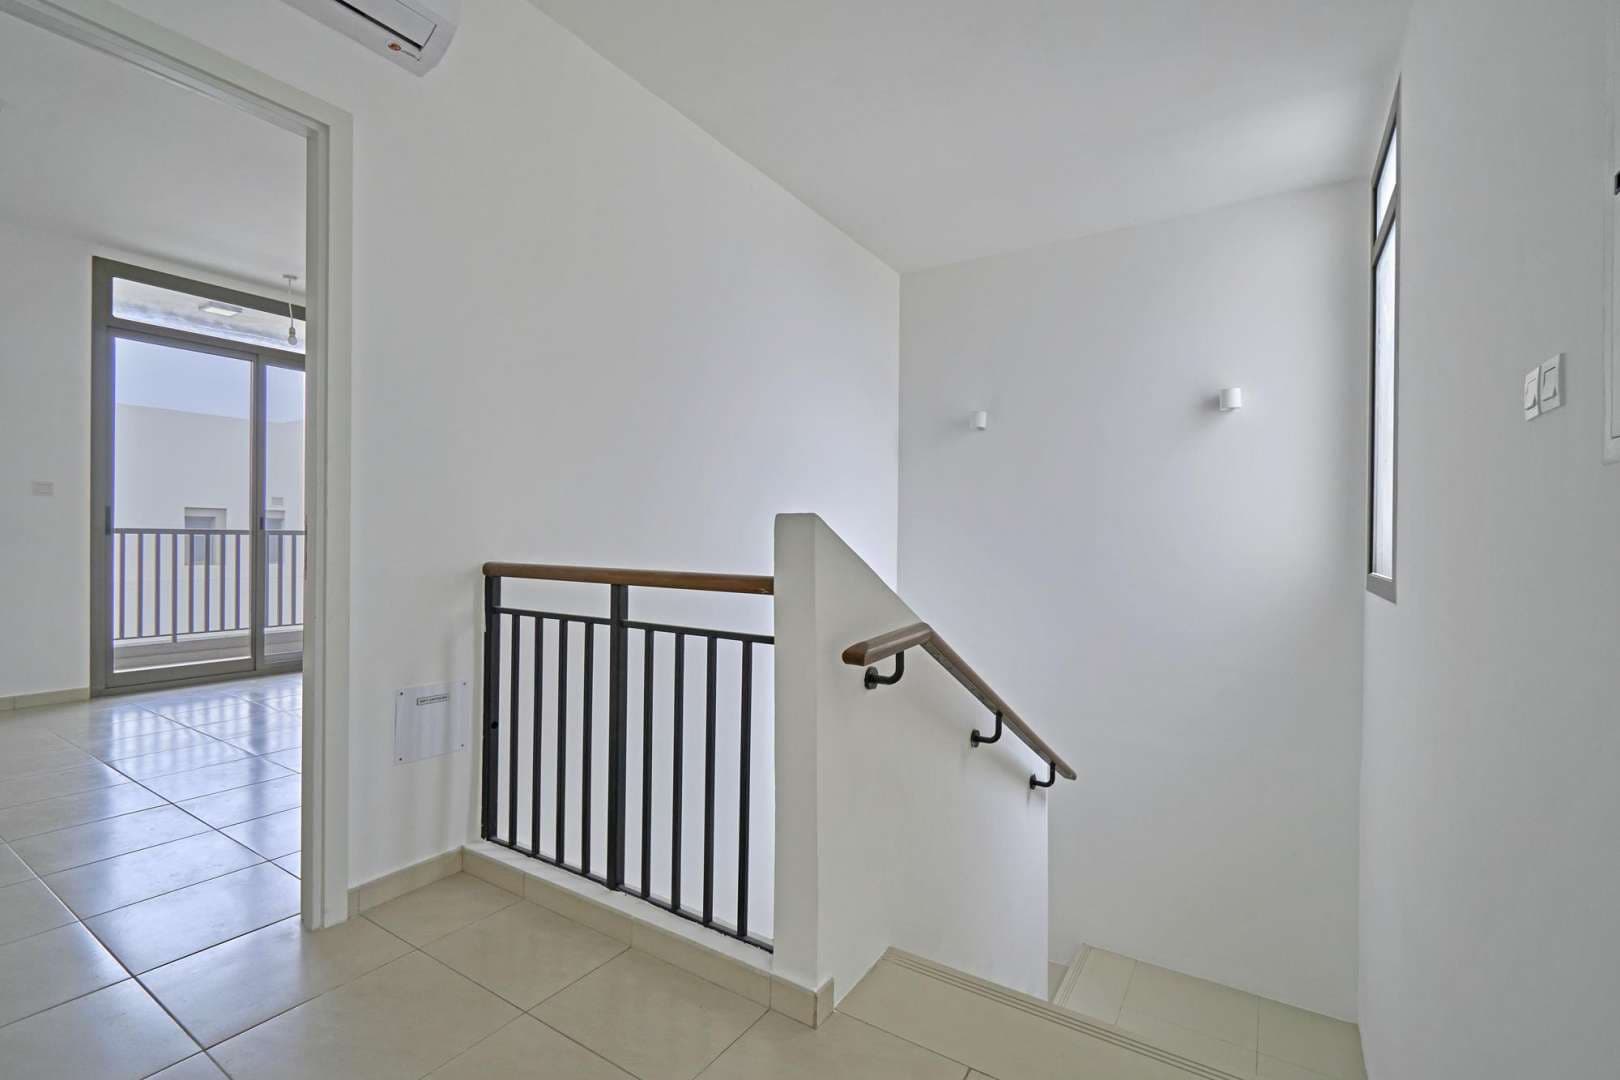 3 Bedroom Townhouse For Rent Hayat Townhouses Lp05683 24fefd97bc1f2e00.jpg